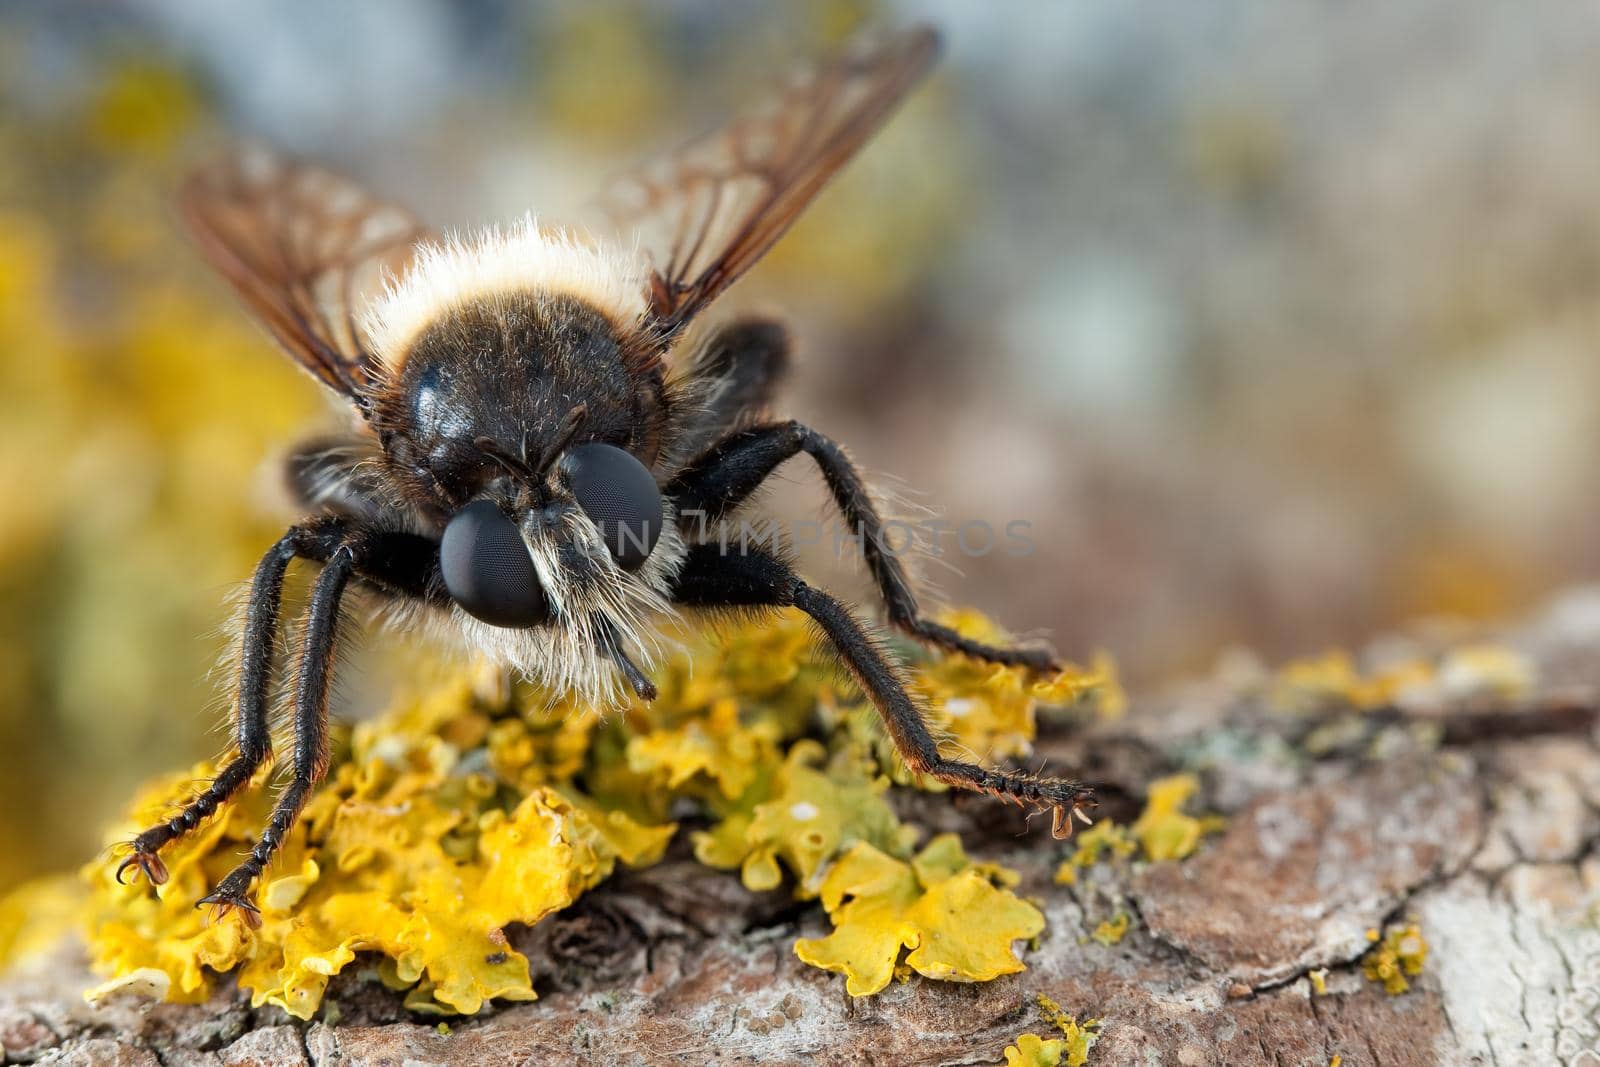 Fly with big eyes and a hairy face on the yellow lichens
